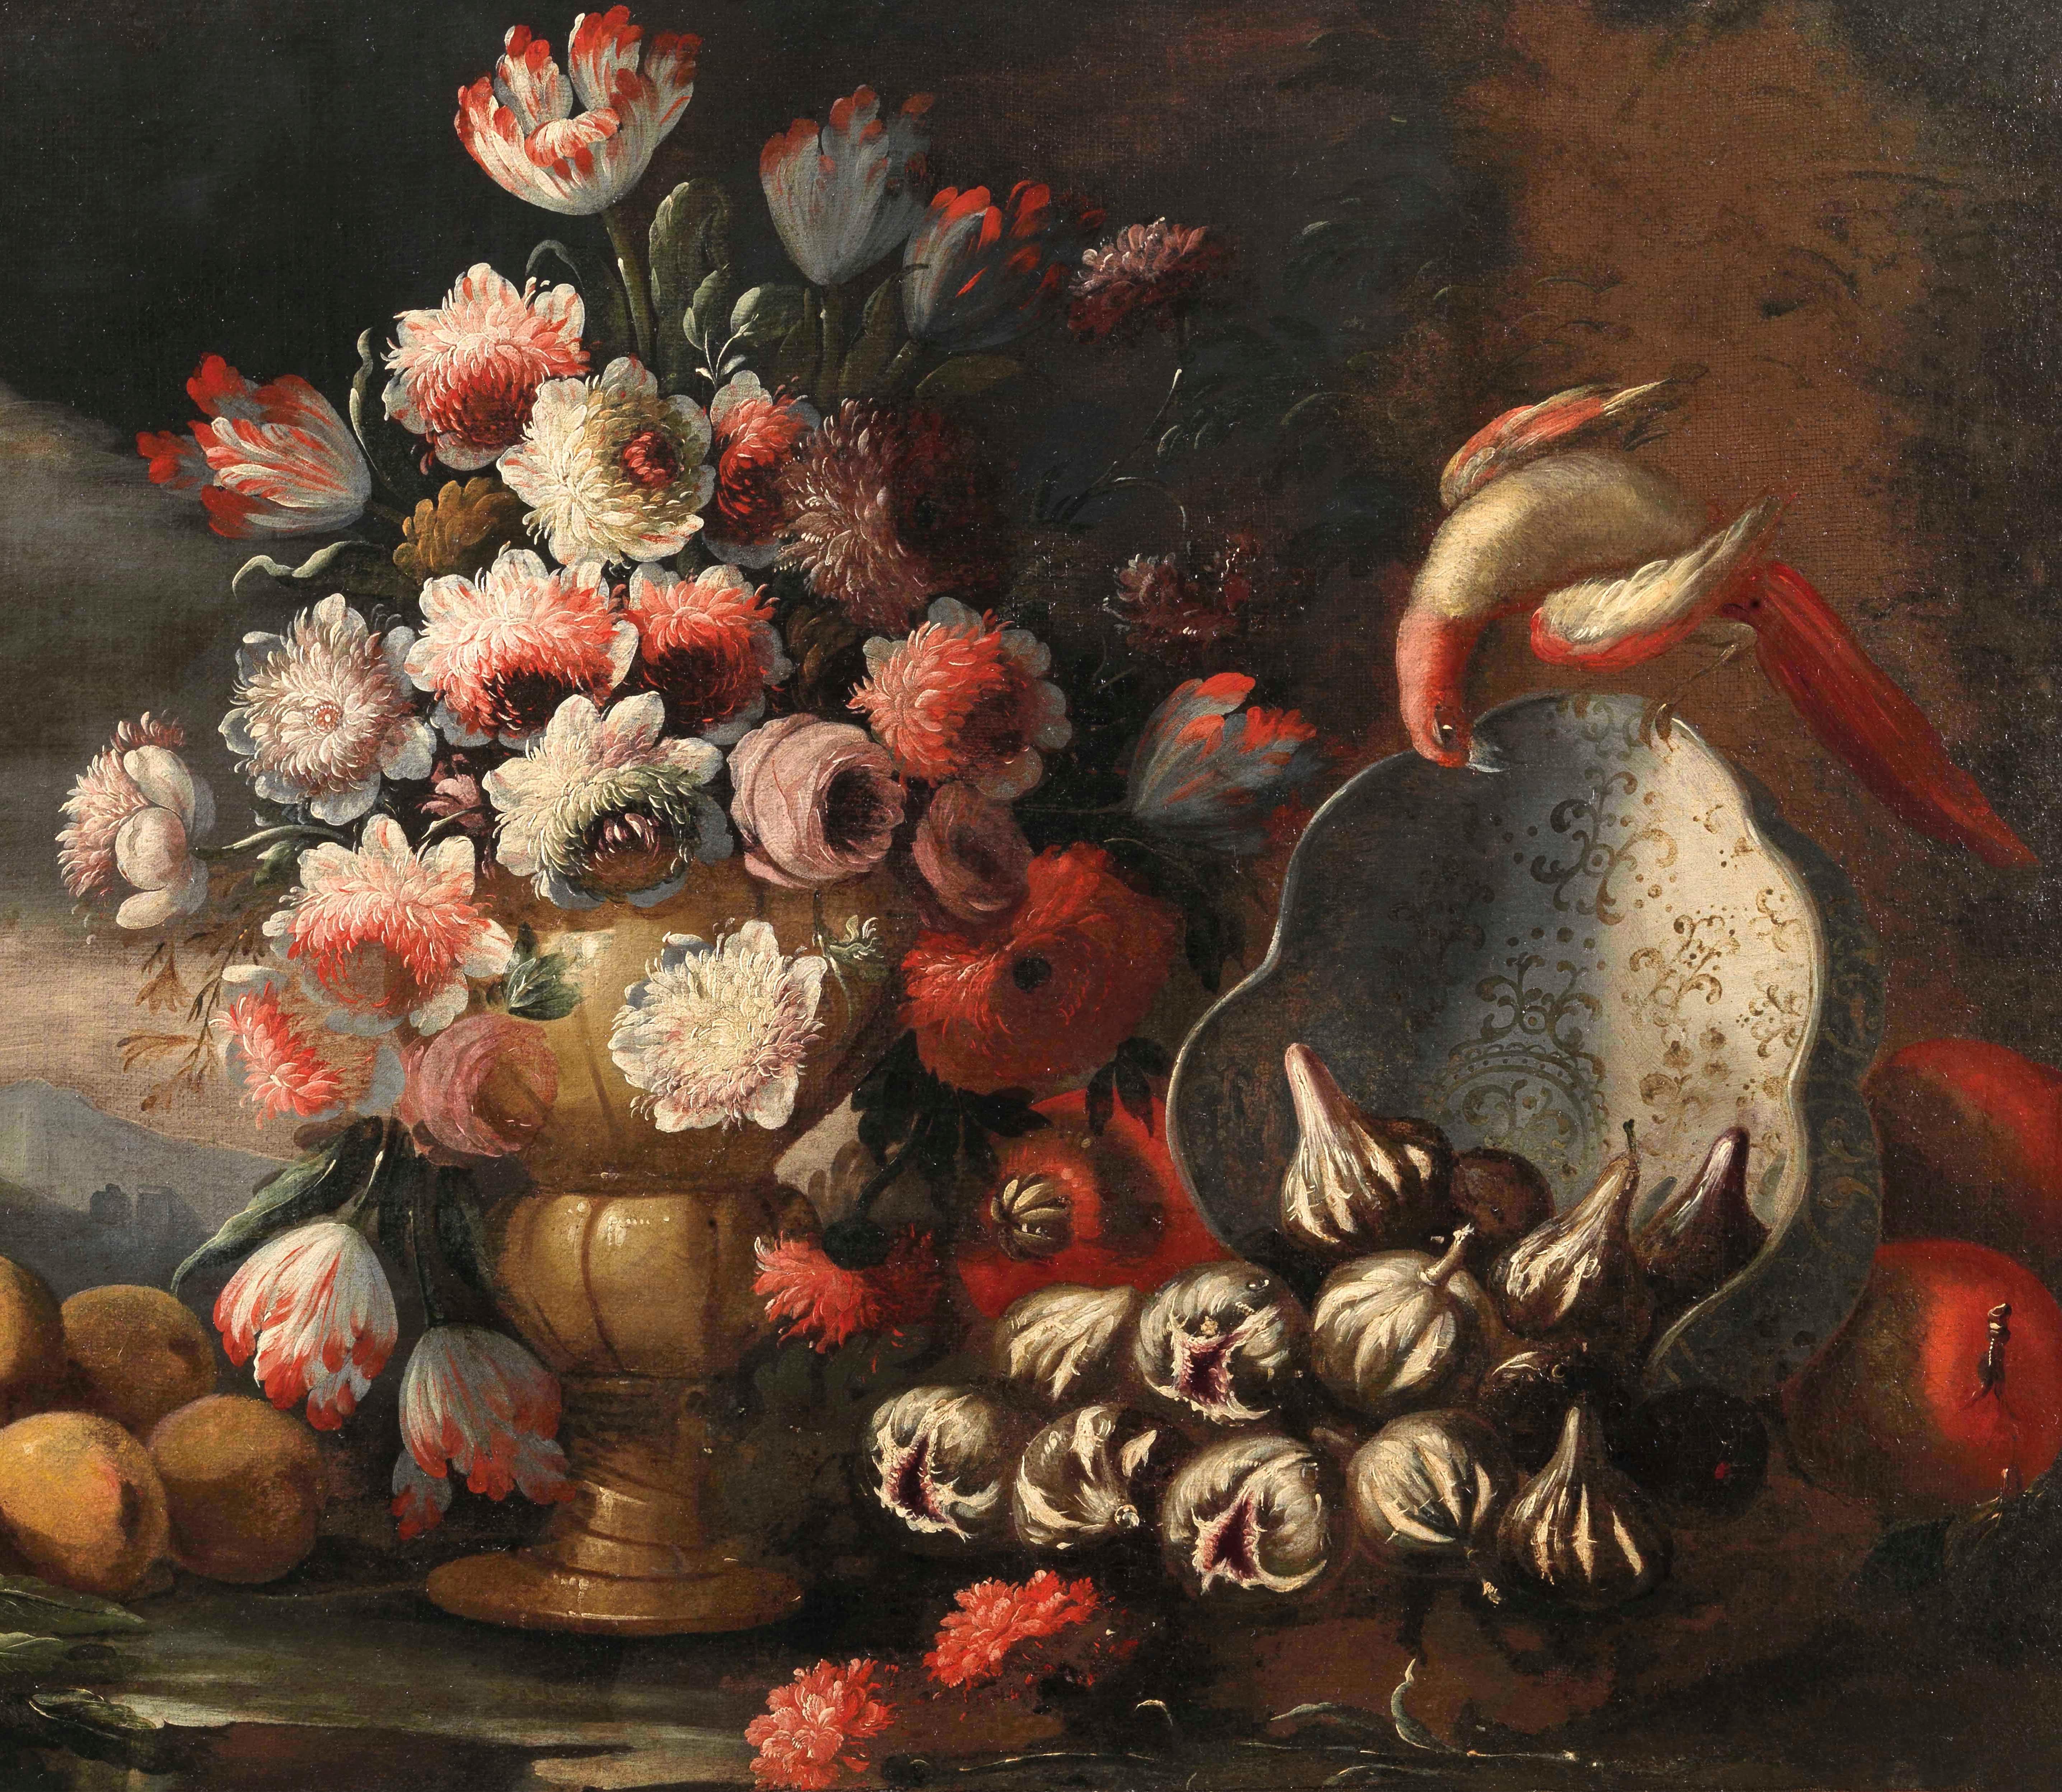 Nicola Van Houbraken ( Messina 1668 Livorno 1723 ) and Gasparo Lopez (Napoli 1677 - ? 1732 ) 
Still-life with Pomegranates, Beets and White turnip by Nicola Van Houbraken
still life with flowers in a vase, parrot, plate by Gasparo Lopez
This pair of